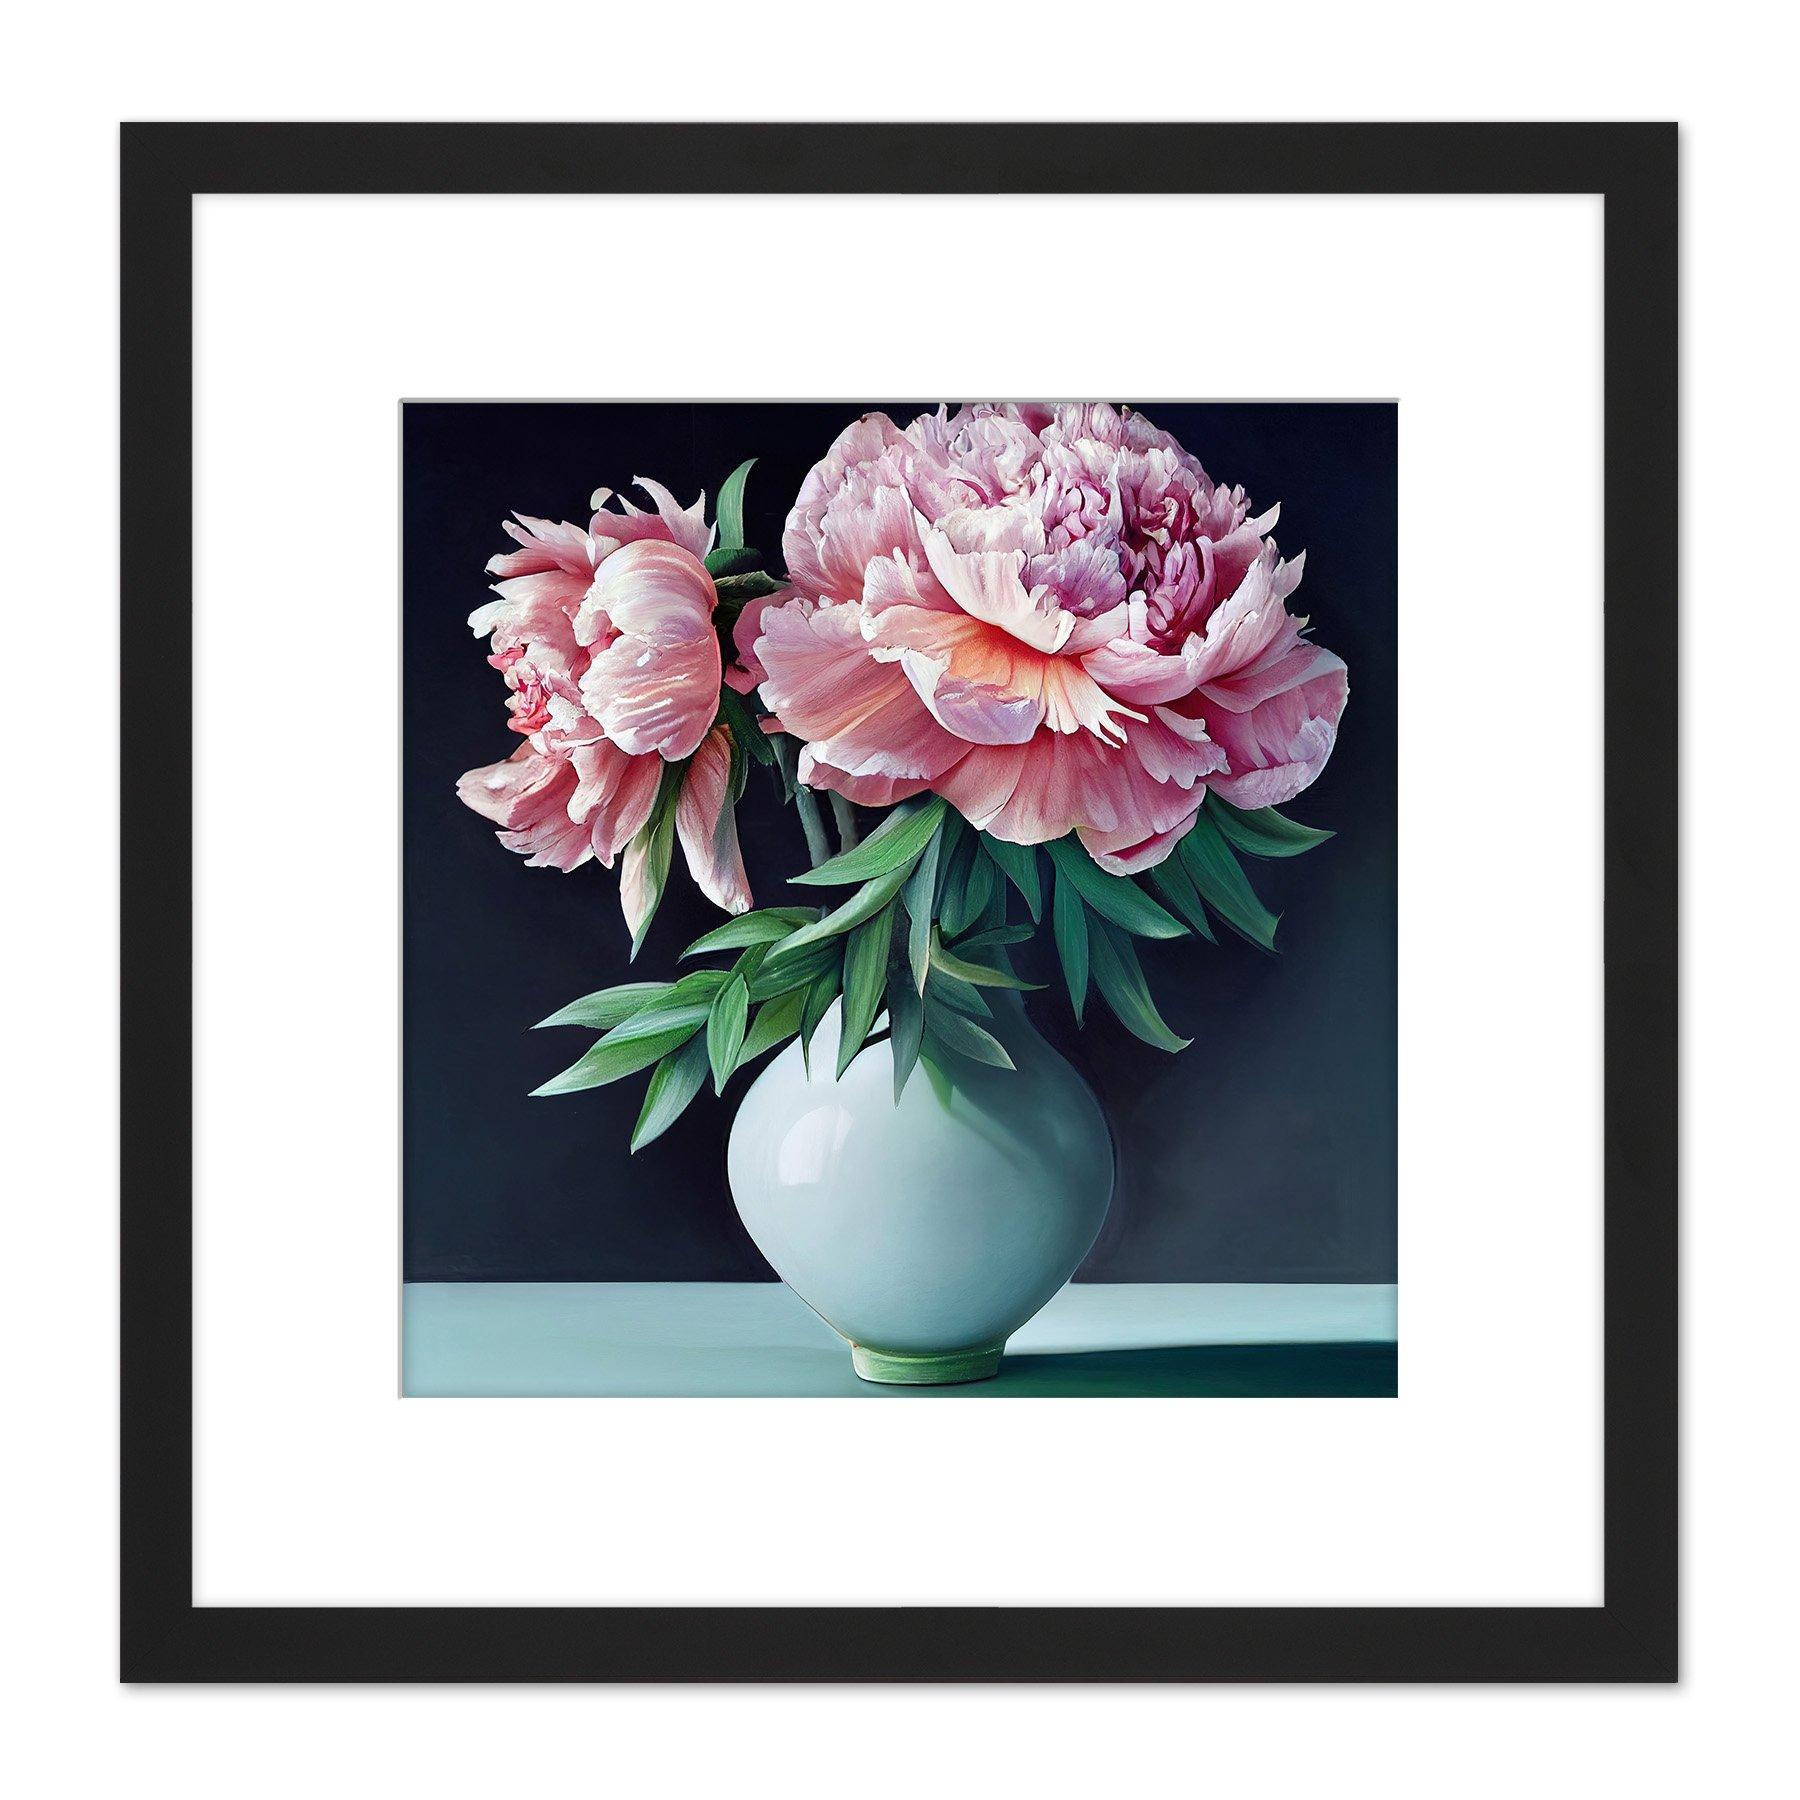 Vase Pink Peony Flowers Floral Bloom Still Life Painting Illustration Pink Square Wooden Framed Wall Art Print Picture 8X8 Inch - image 1